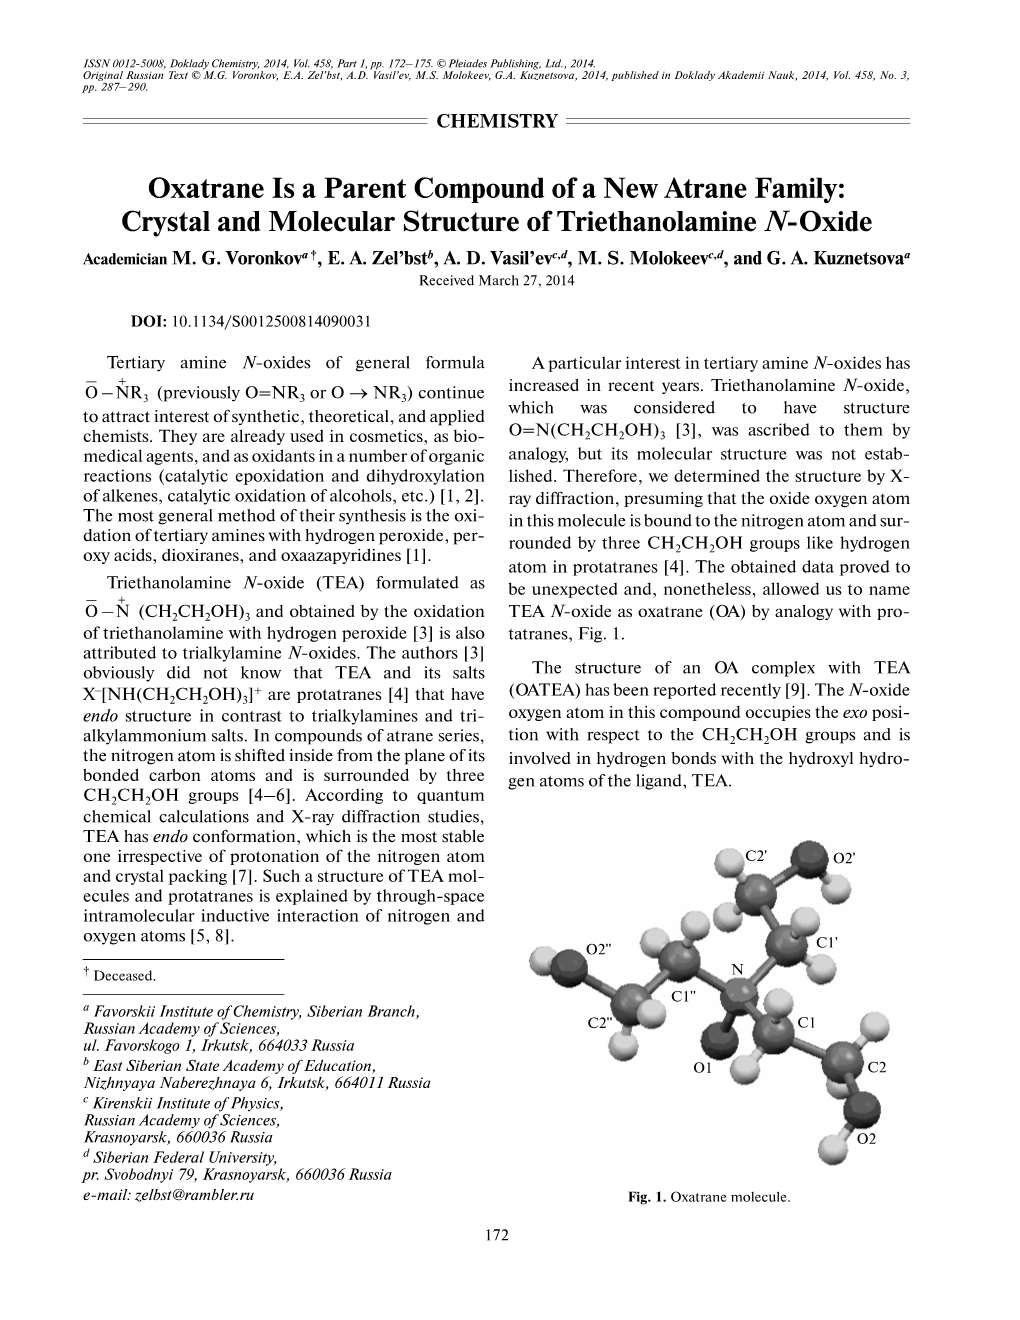 Oxatrane Is a Parent Compound of a New Atrane Family: Crystal and Molecular Structure of Triethanolamine N�Oxide Academician M